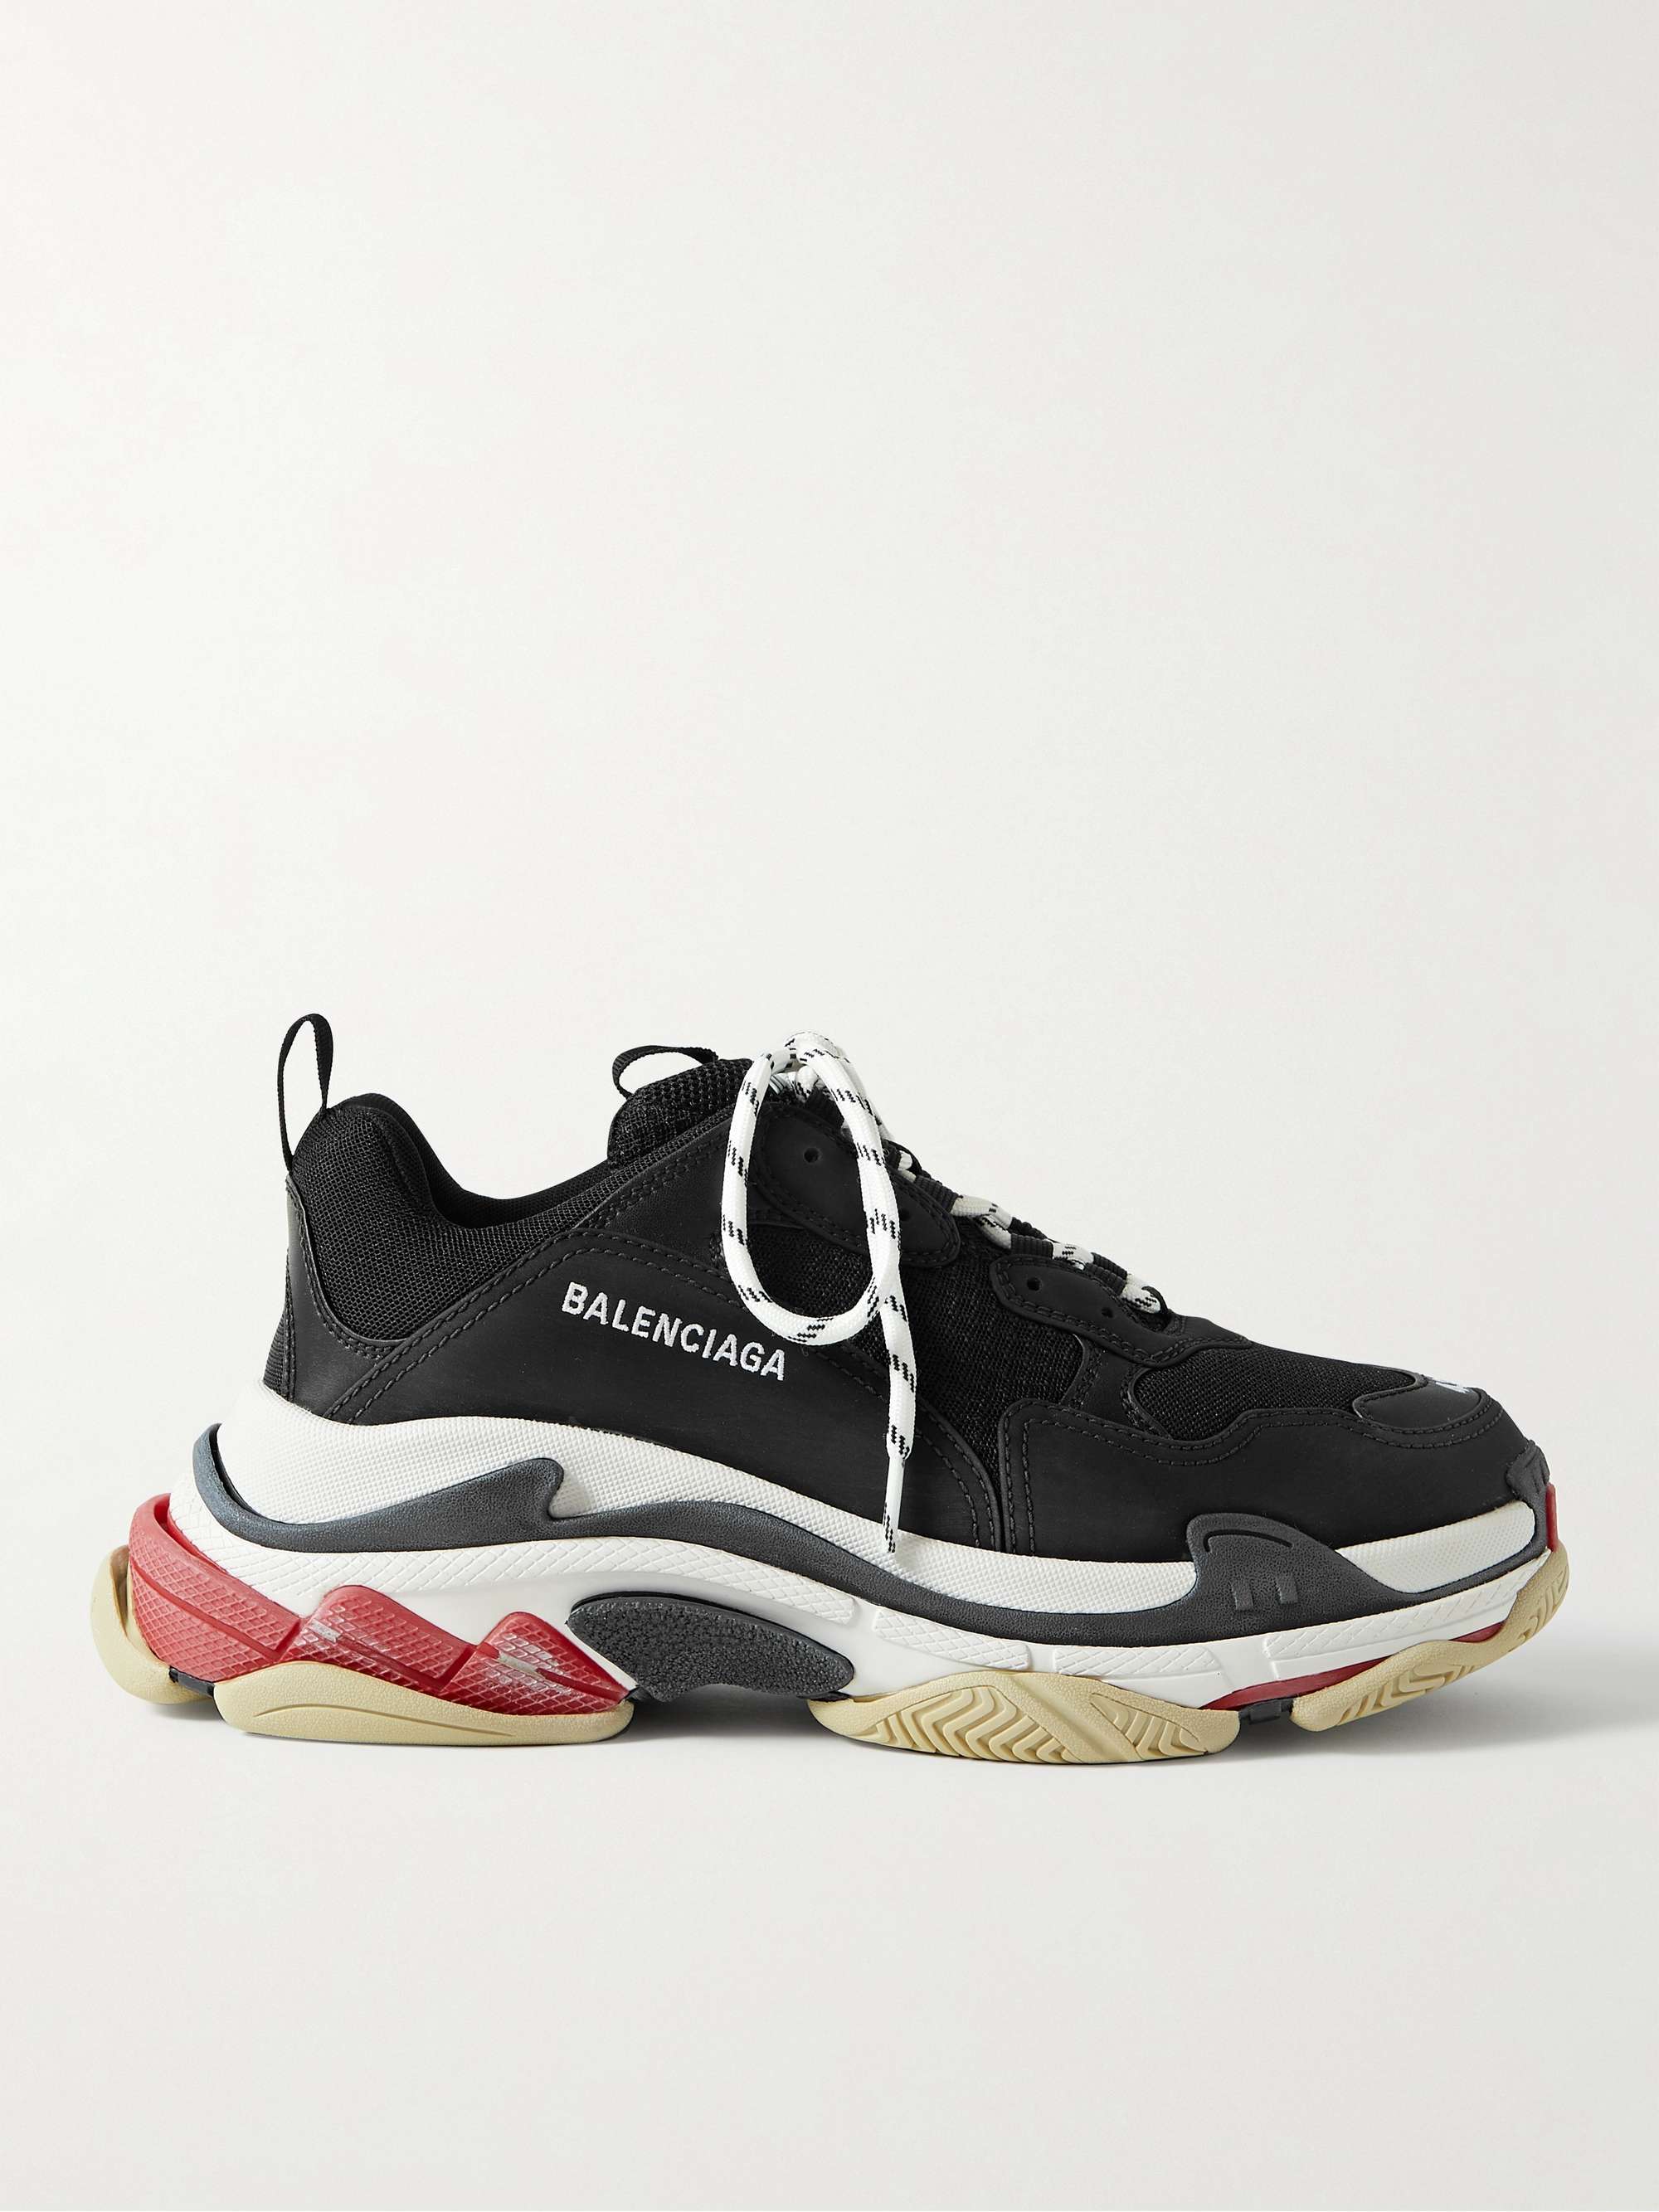 BALENCIAGA Triple S Mesh, Faux Suede and Faux Leather Sneakers | MR PORTER